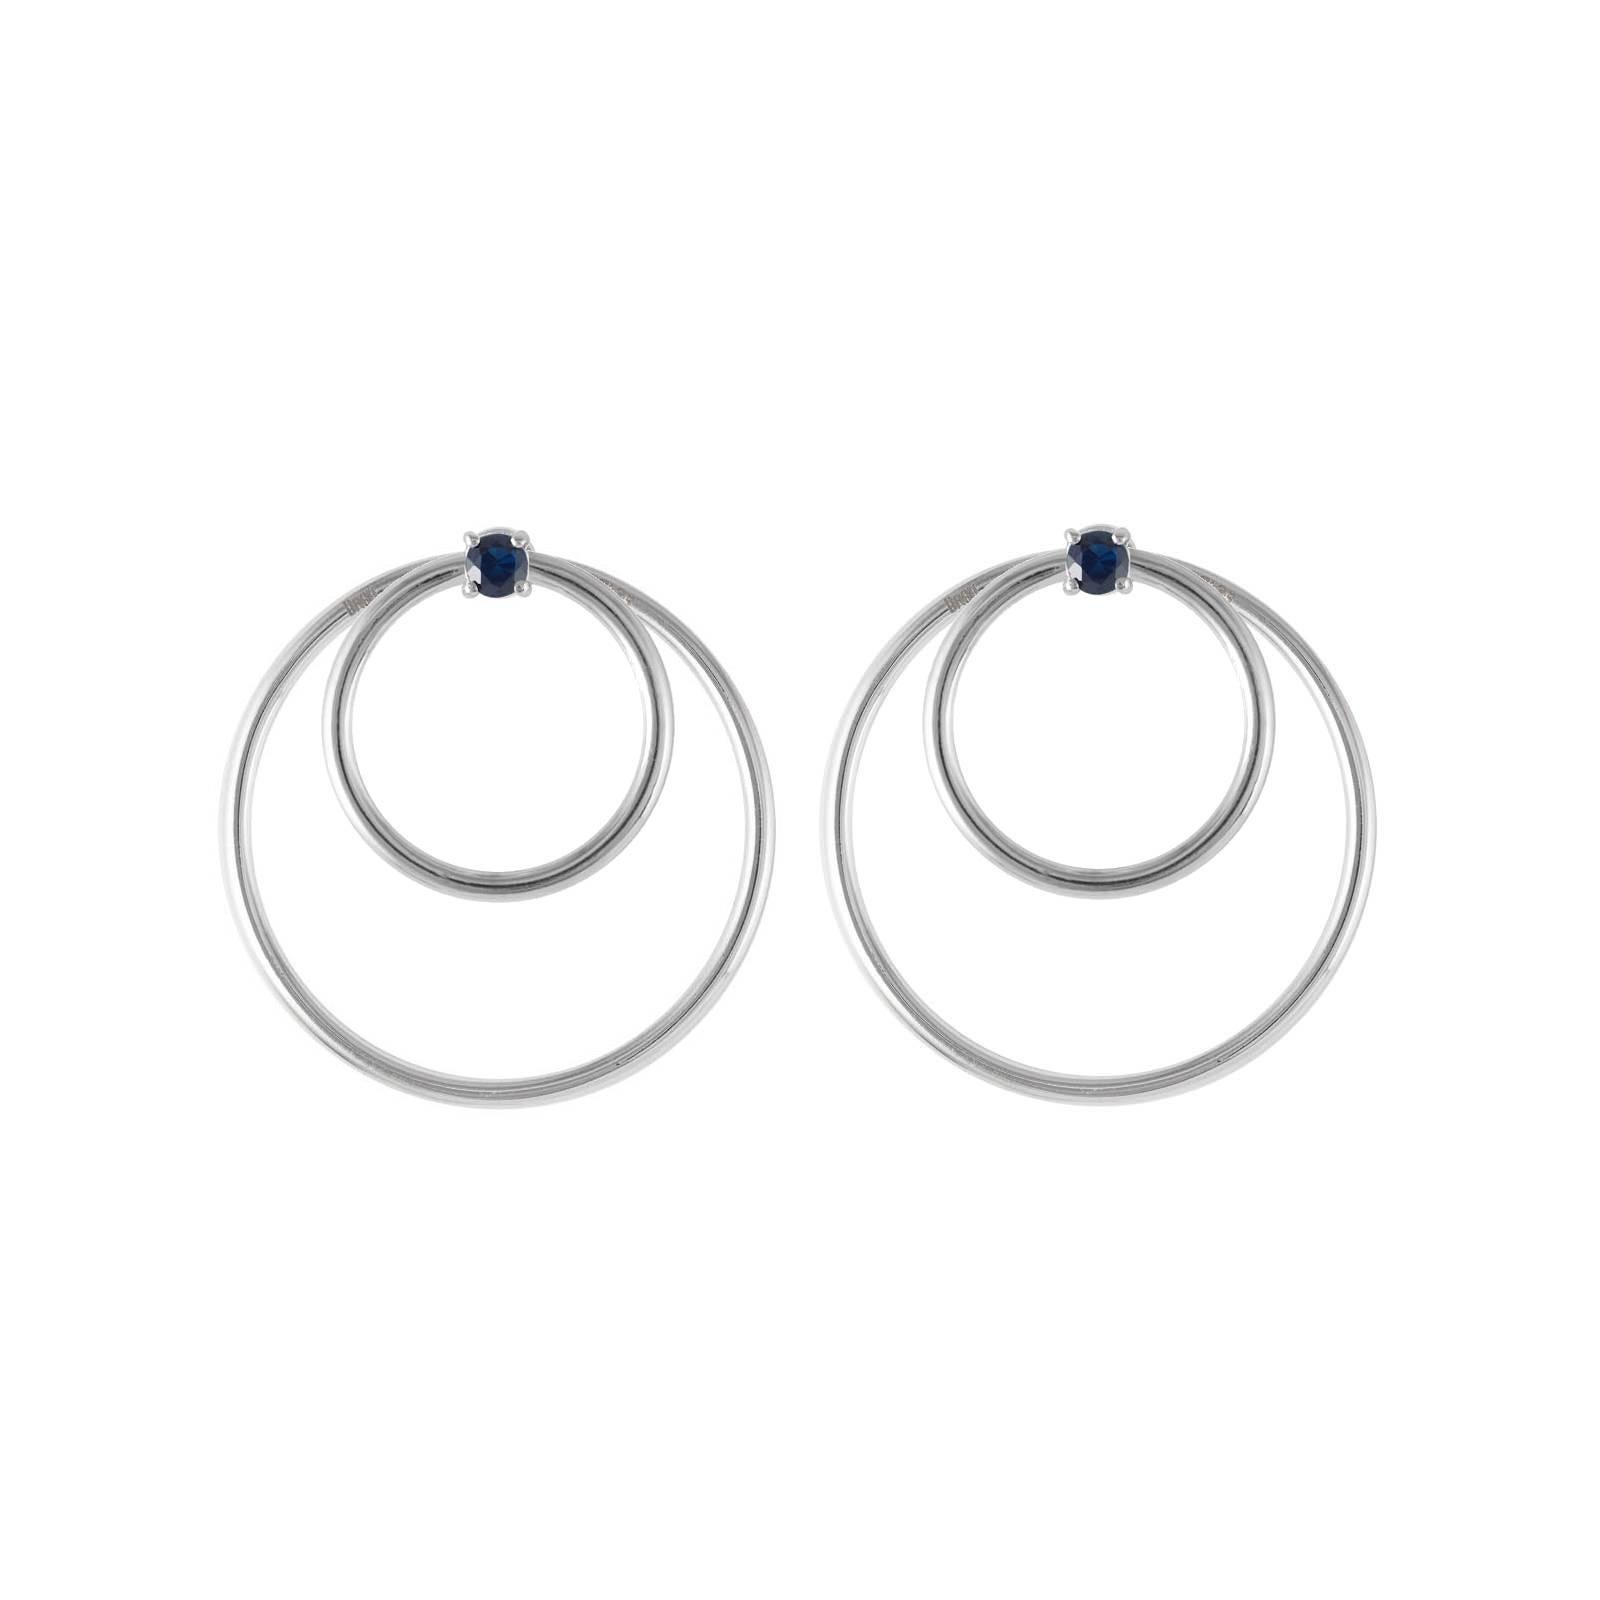 Sapphire and white gold small front facing hoop earrings. Simple chic earrings set with round brilliant cut blue sapphires in 18 karat white gold. Perfectly geometrically balanced to be pleasingly elegant and flattering. A perfect complement to the